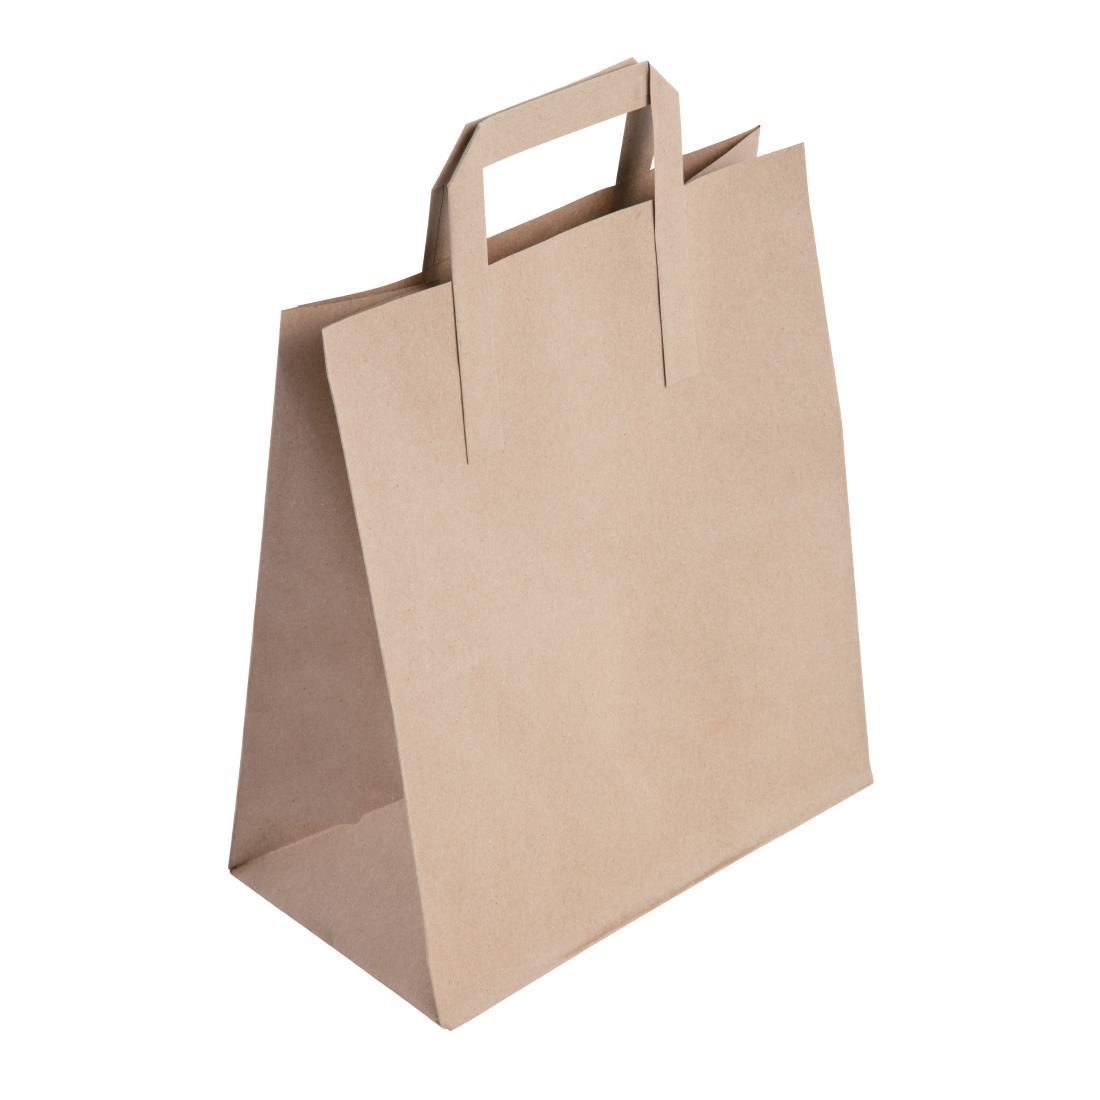 Fiesta Compostable Green Compostable Recycled Brown Paper Carrier Bags Large (Pack of 250) - CF592  - 3